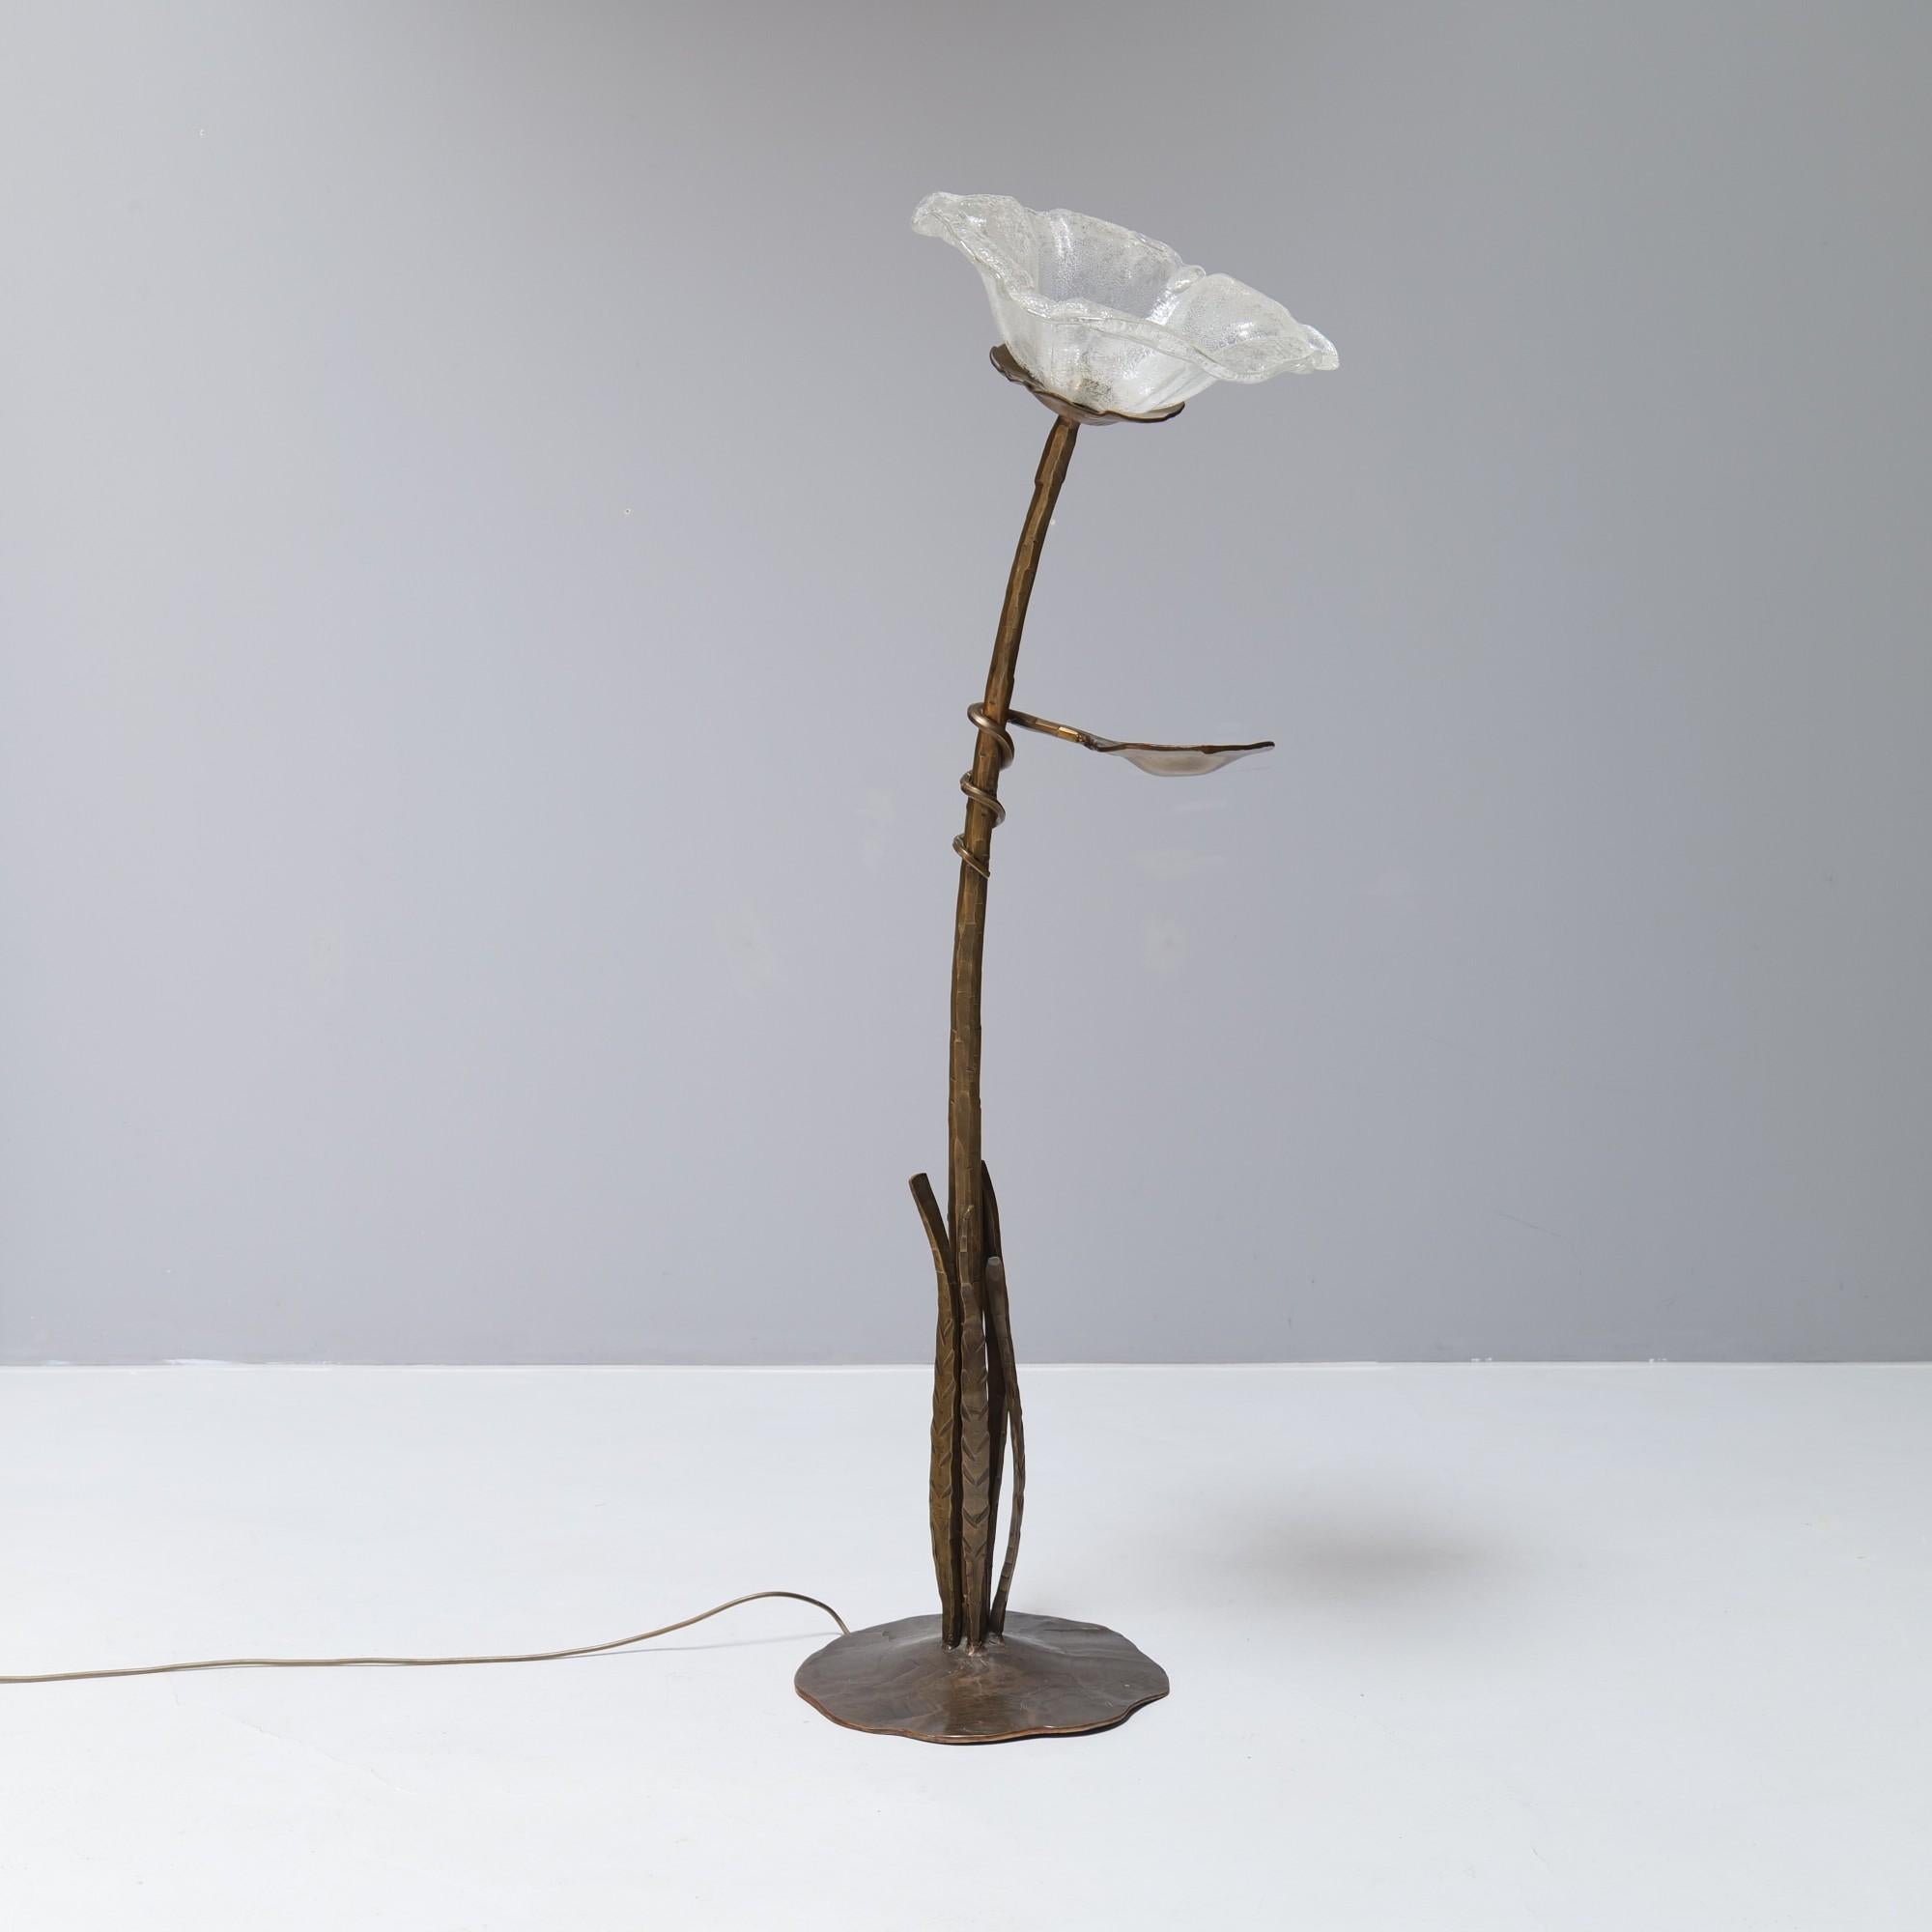 Imposant brutalist floor lamp made out of bronze and glass.
Very good condition without damages.

1980-s Germany